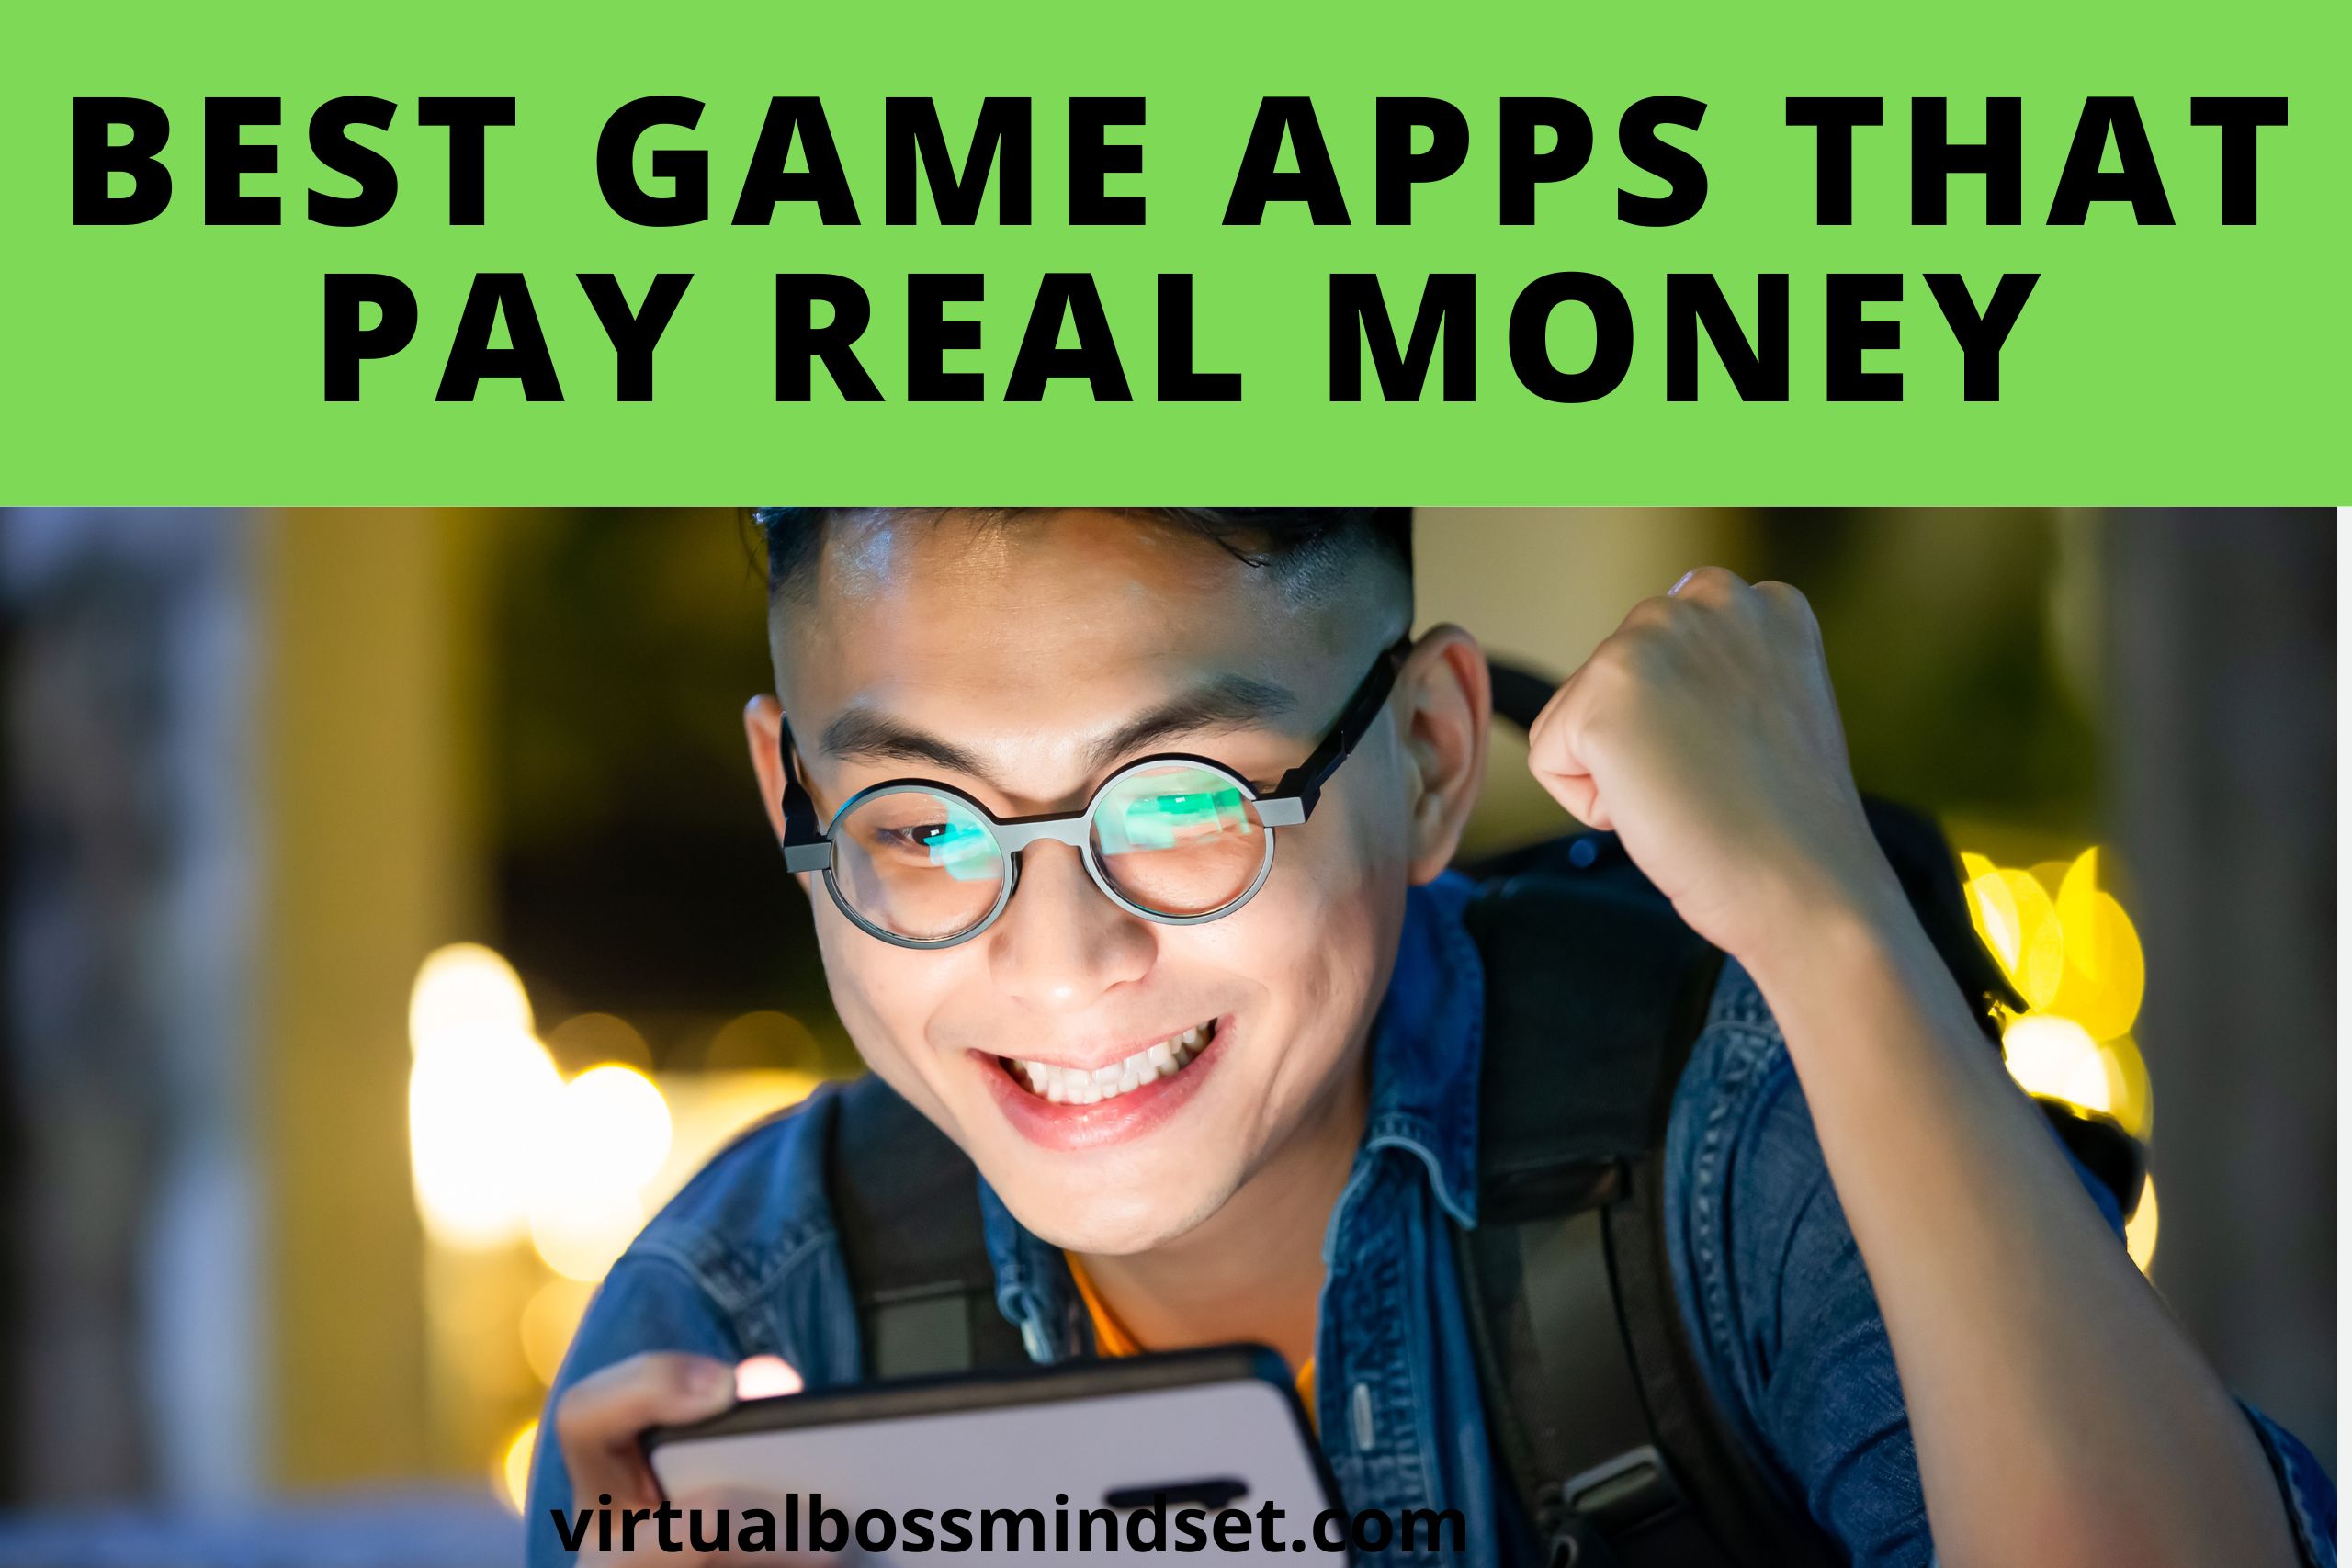 10 Best Game Apps to Win Real Money The Same Day